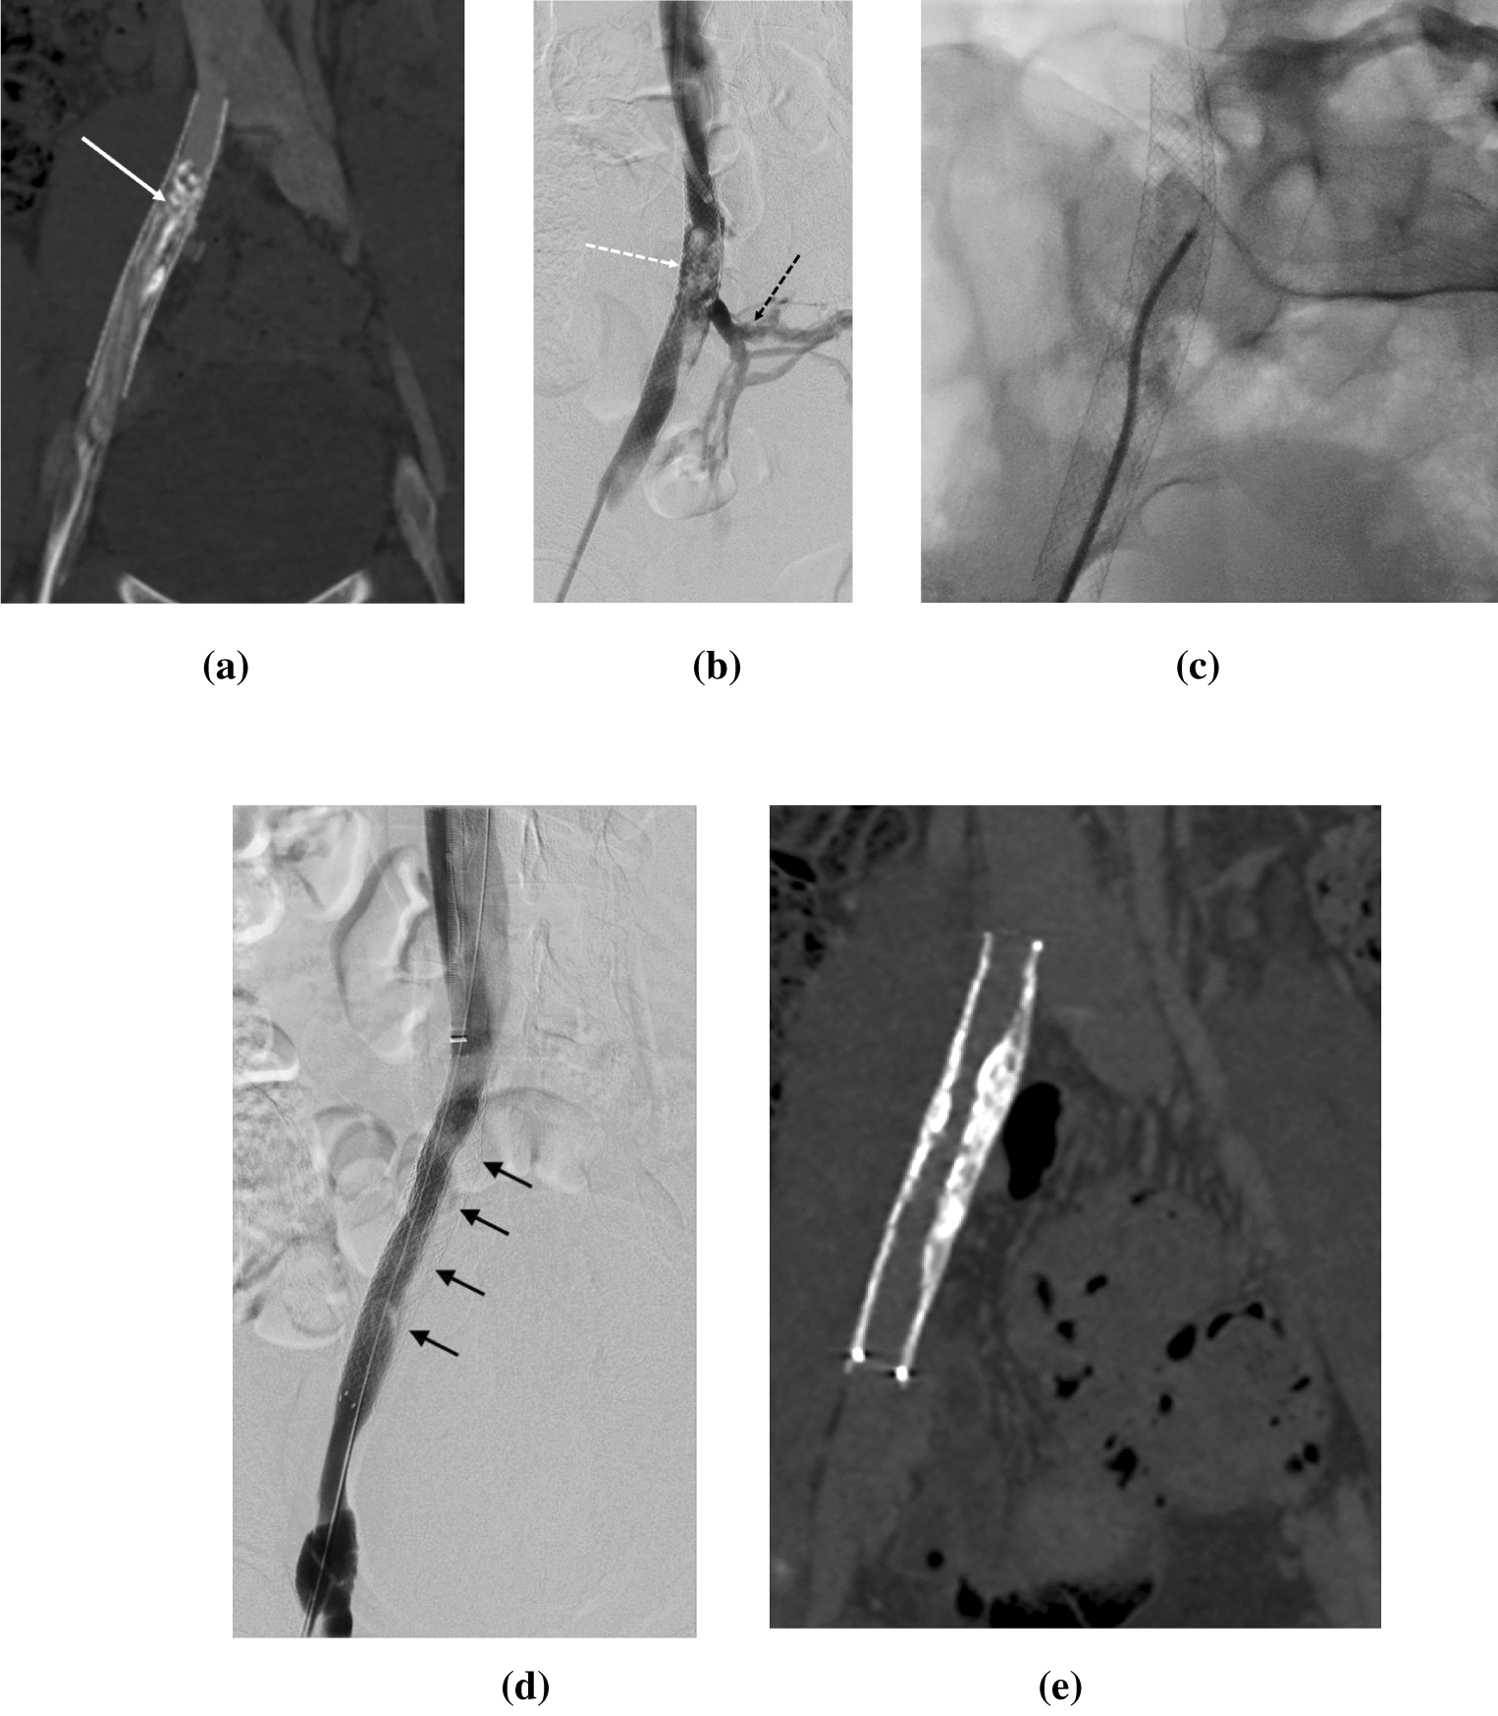 Treatment of Chronic Calcified Endostent Venous Occlusion by Intravascular Lithotripsy